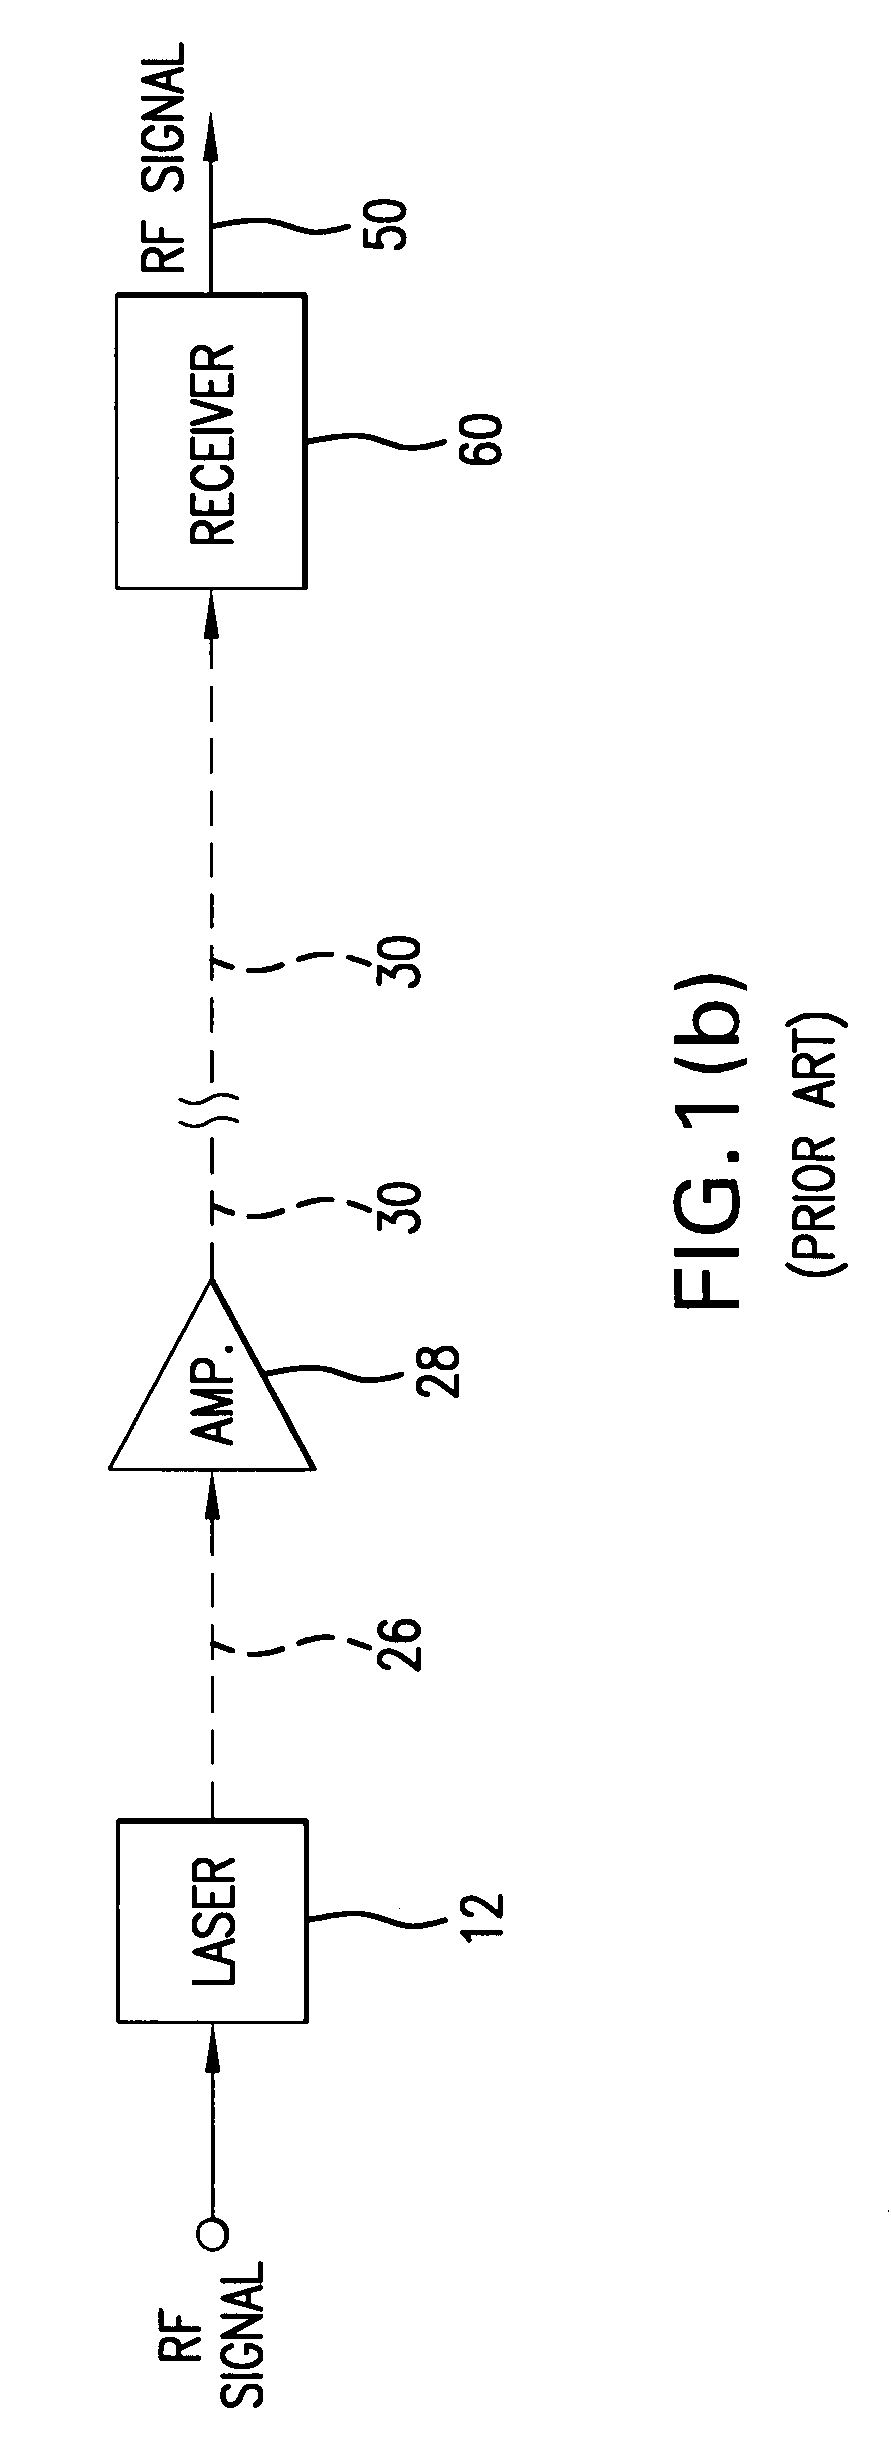 Directly modulated or externally modulated laser optical transmission system with feed forward noise cancellation